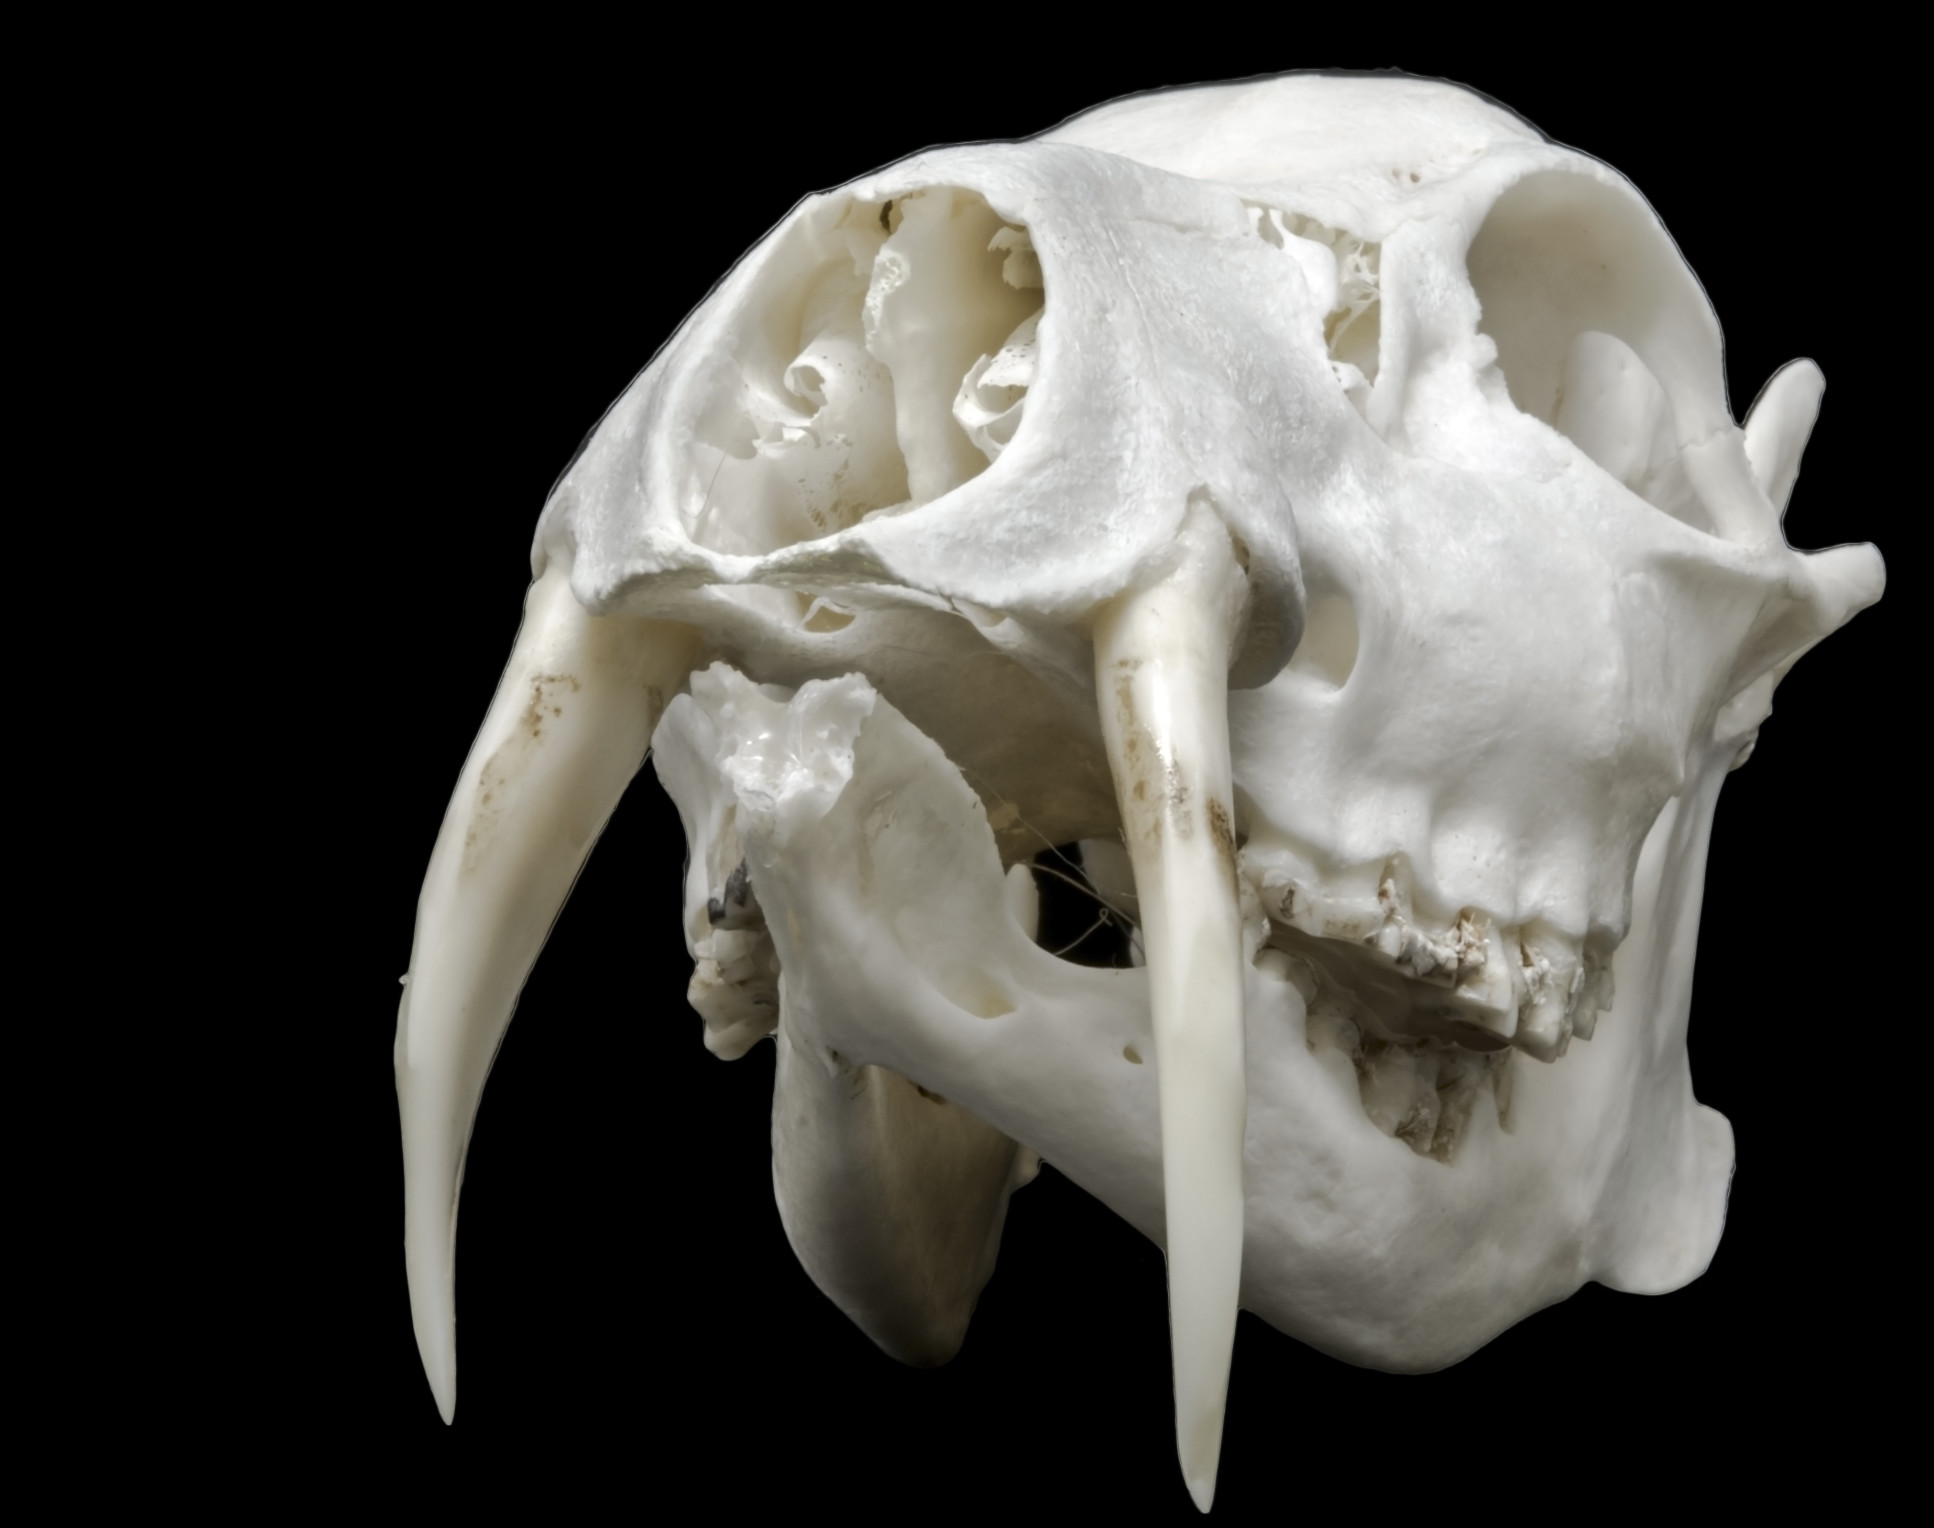 Skull of a Chinese water deer